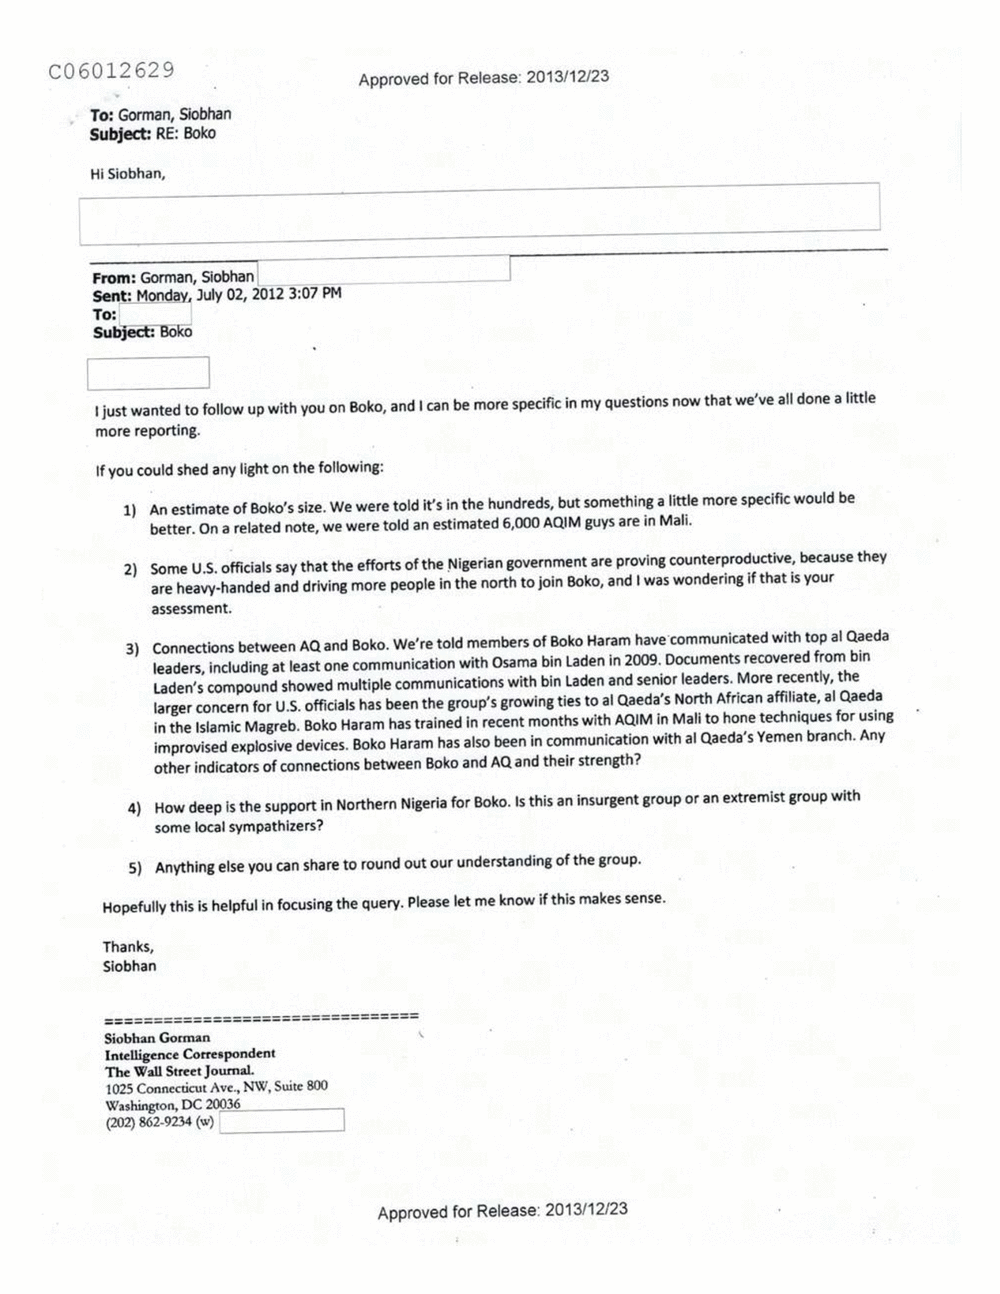 Page 187 from Email Correspondence Between Reporters and CIA Flacks